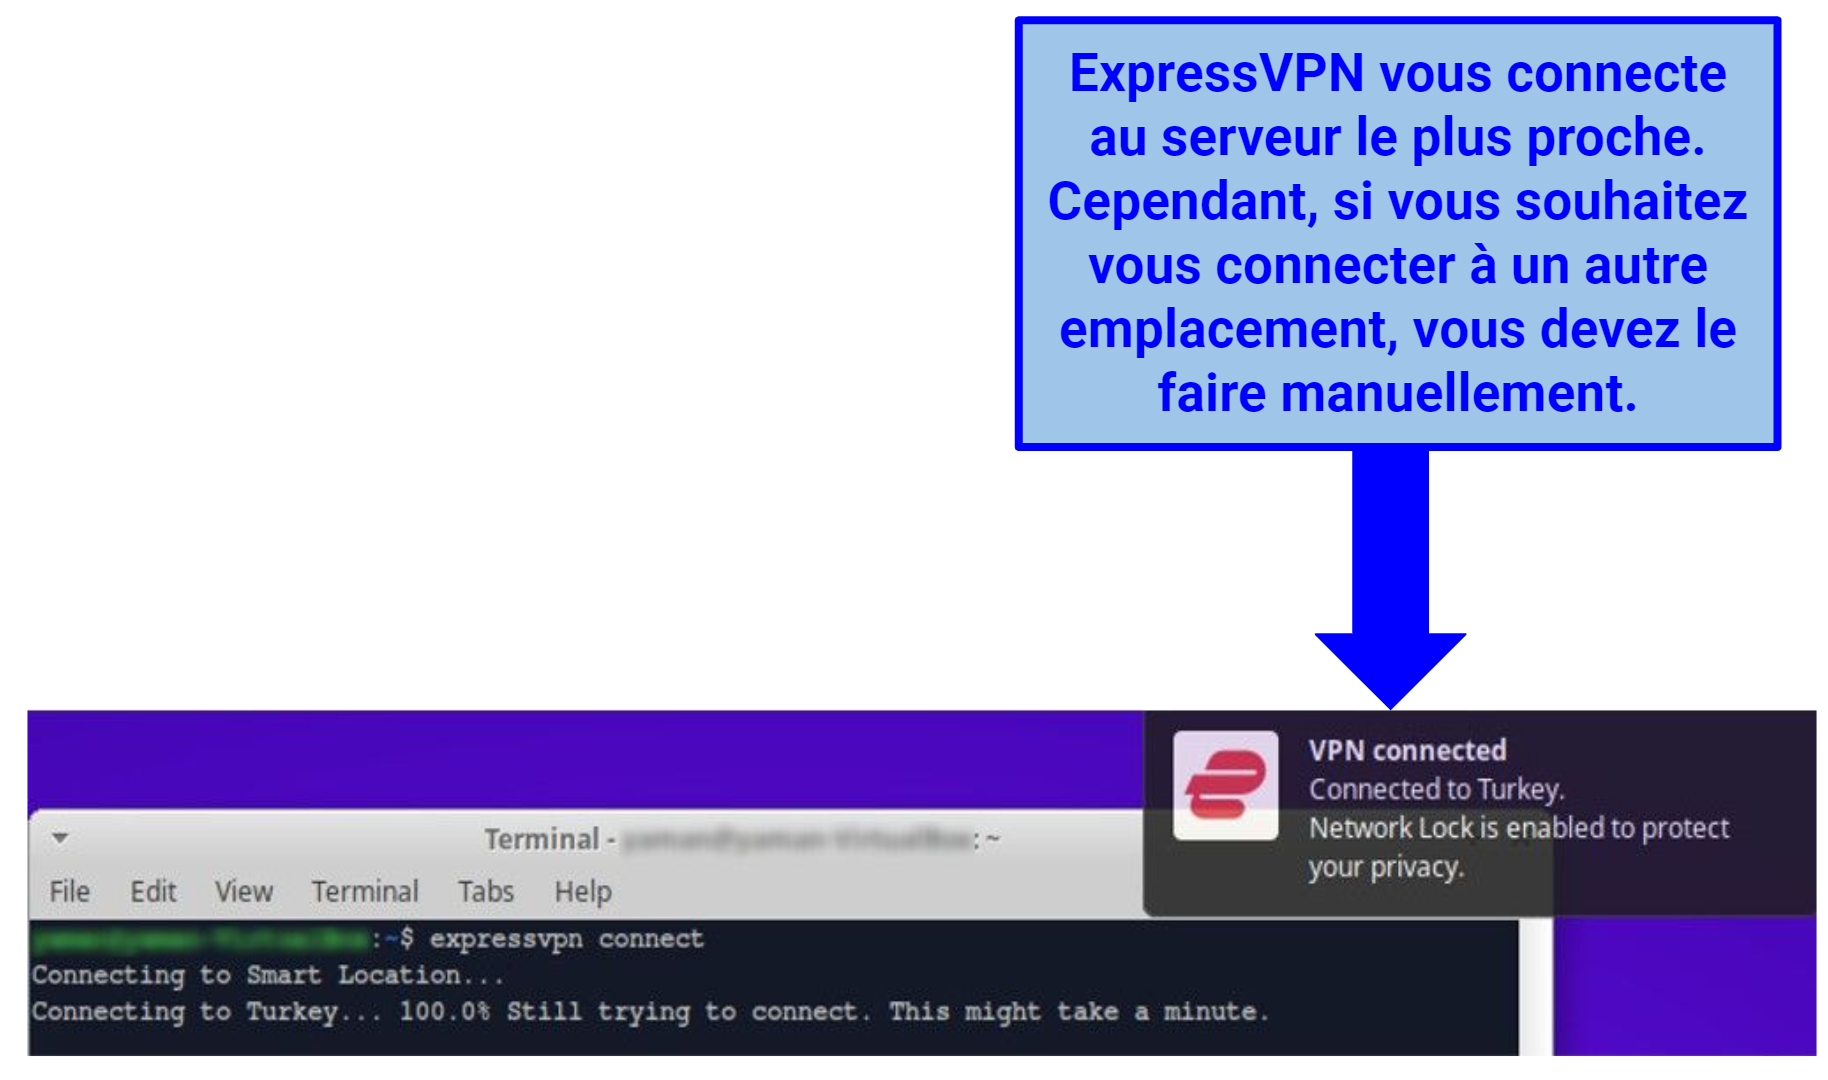 Screenshot of Linux Terminal (CLI) showing ExpressVPN connected notification